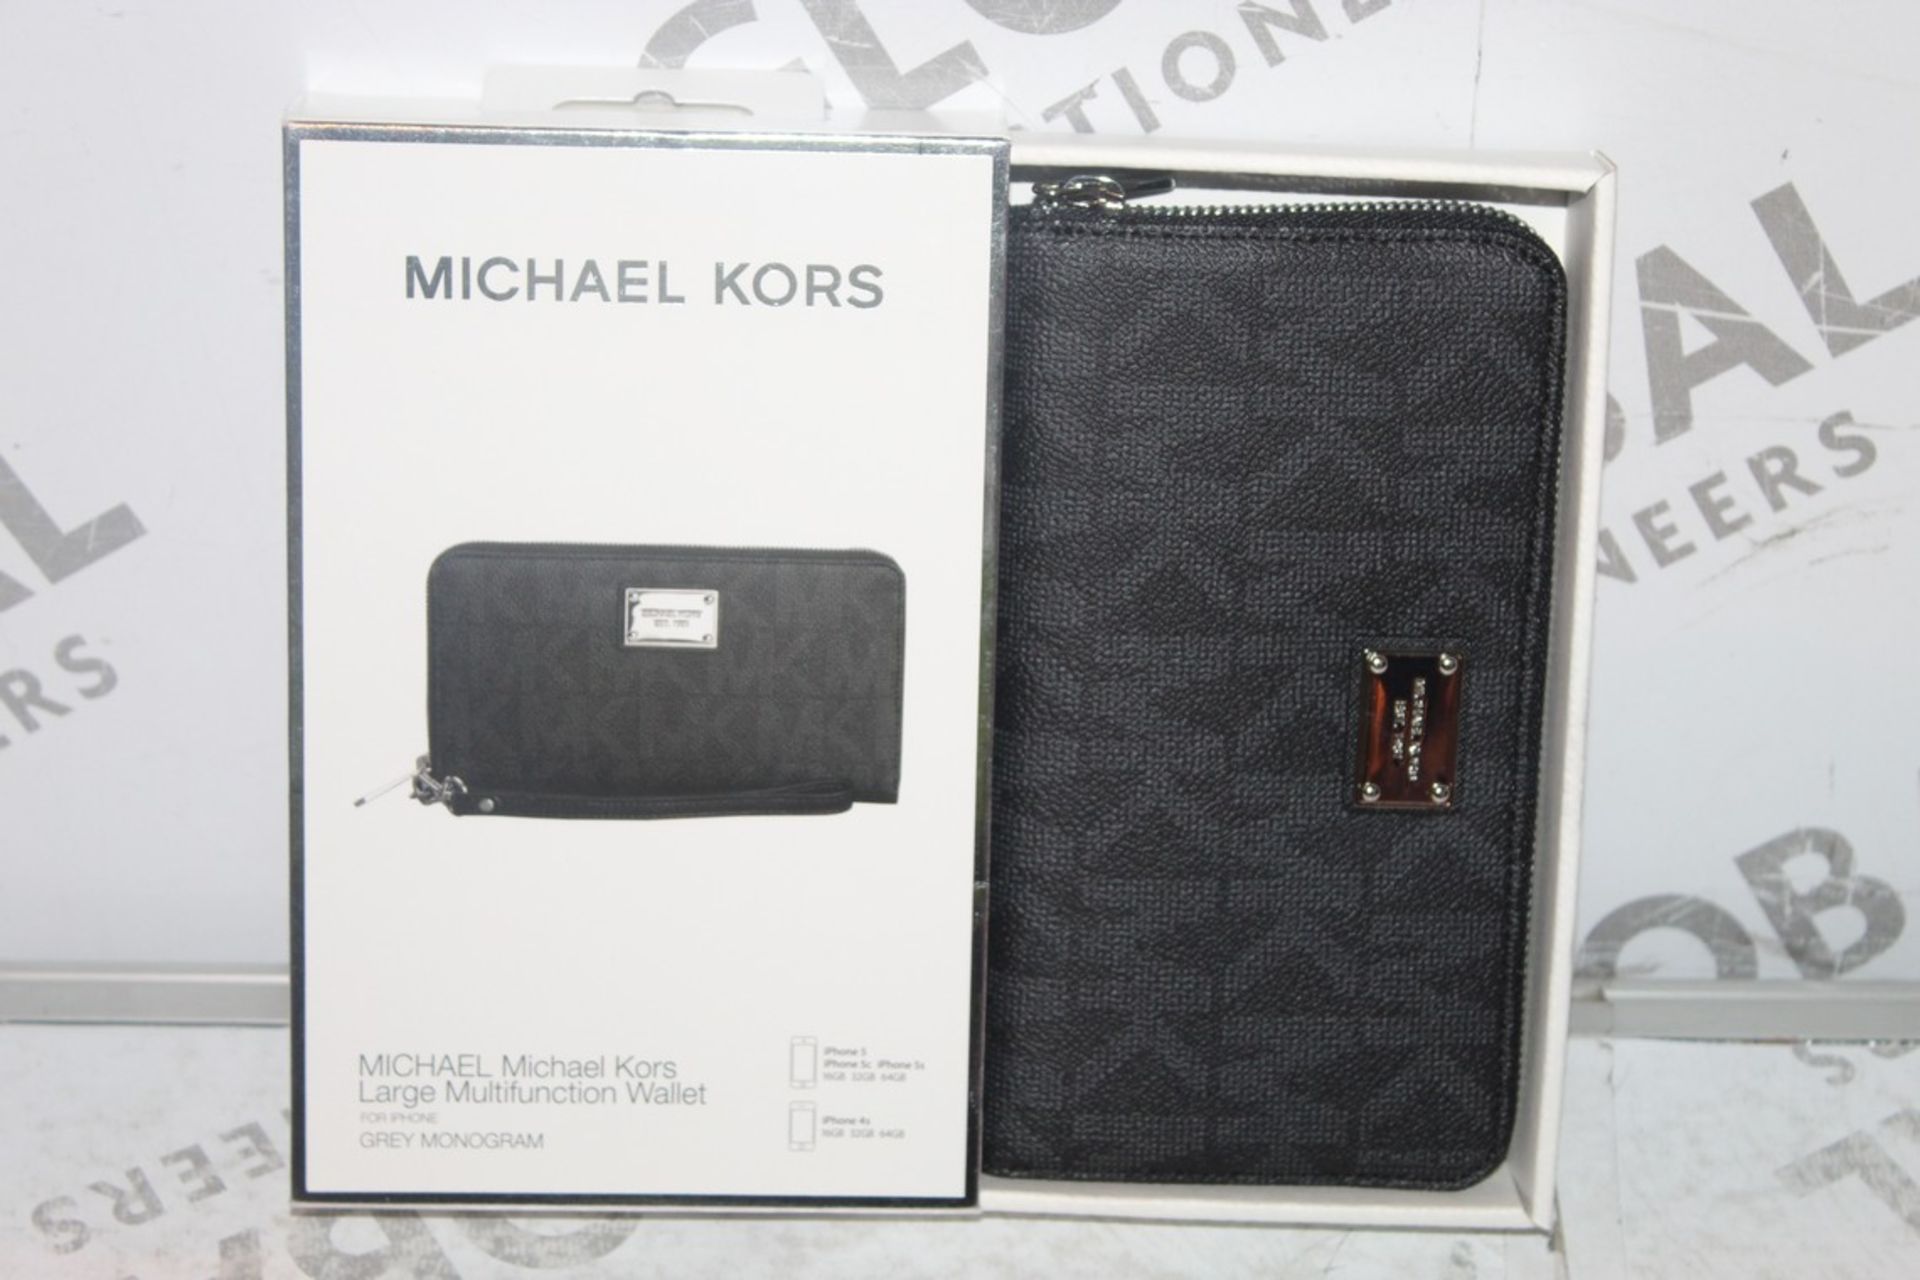 Lot to Contain 2 Brand New Michael Kors Large Multi Function Wallets in Black Combined RRP £60